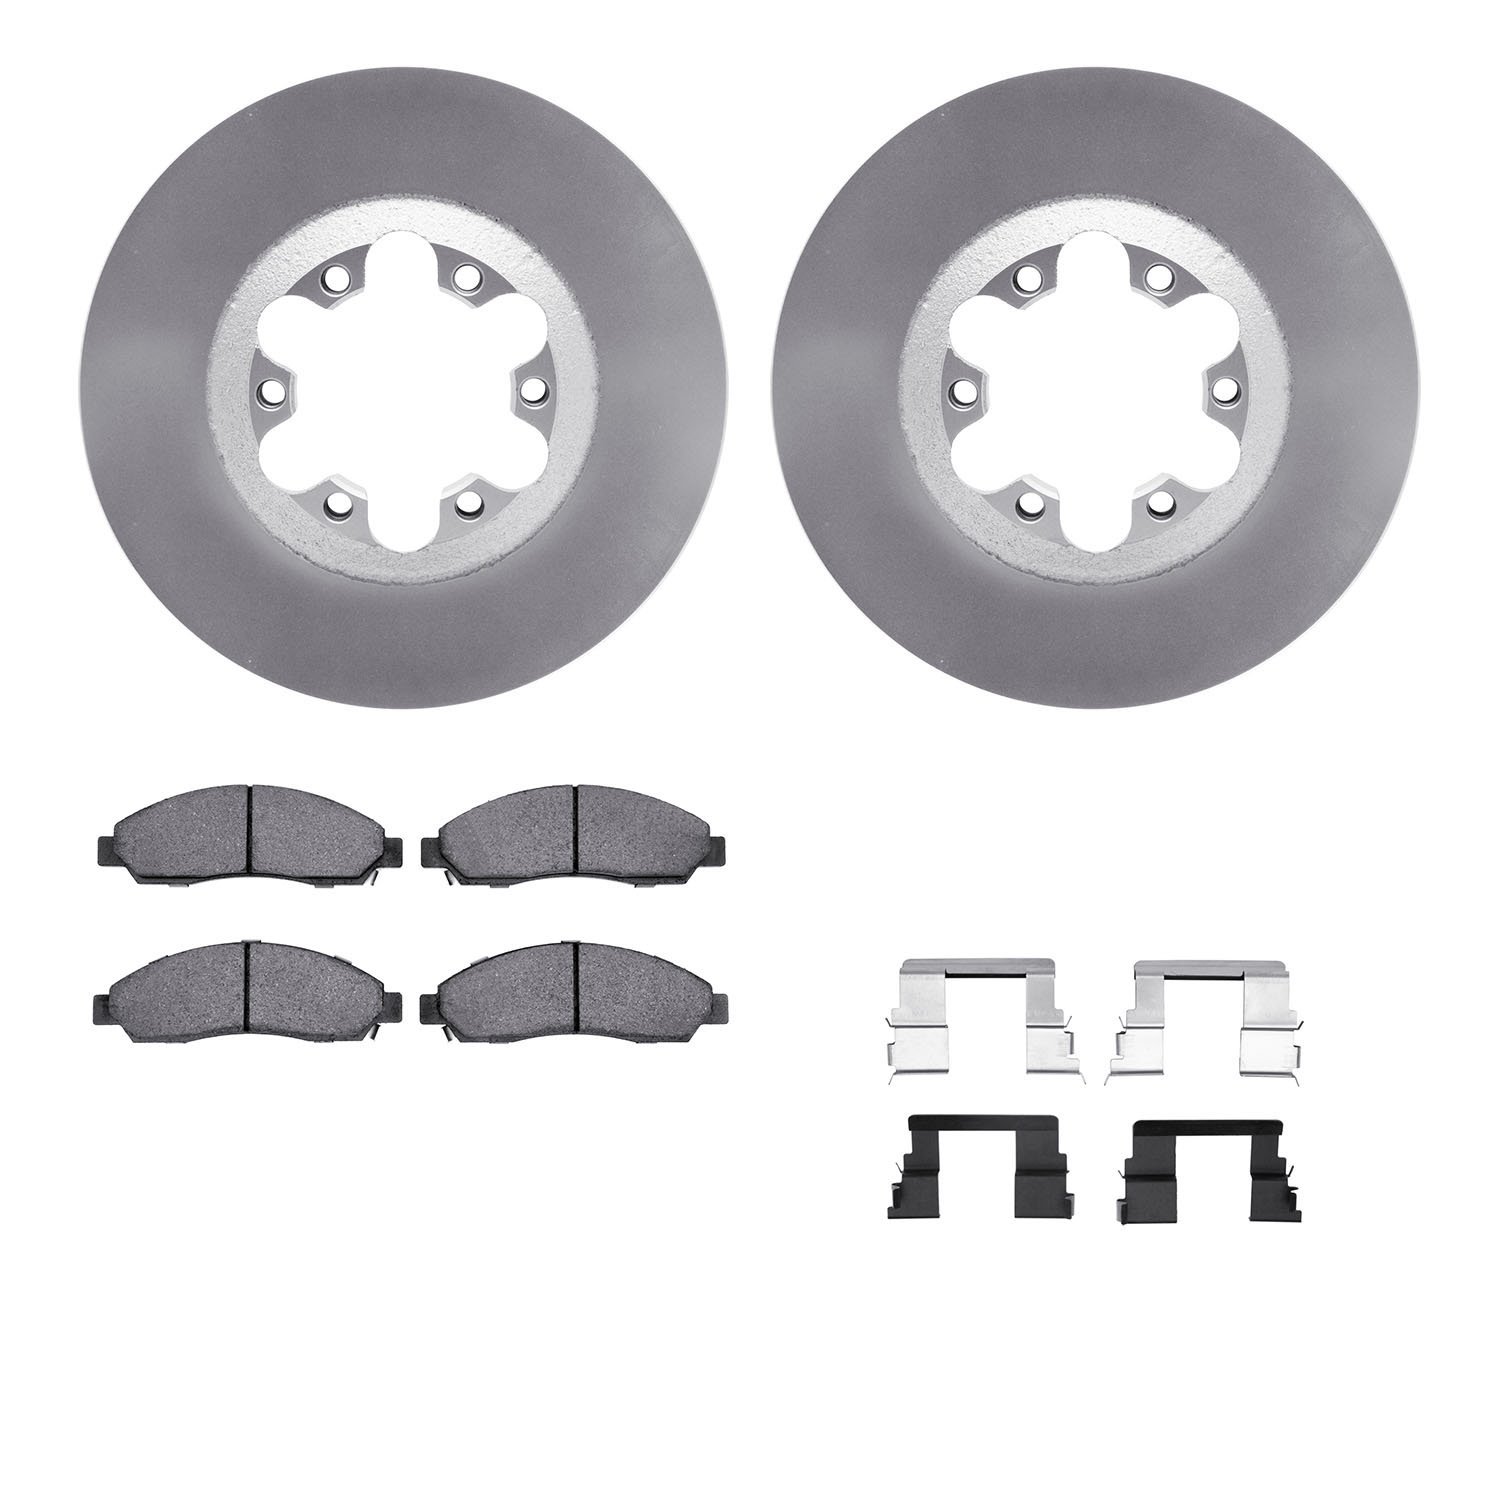 4412-48022 Geospec Brake Rotors with Ultimate-Duty Brake Pads & Hardware, 2004-2008 GM, Position: Front